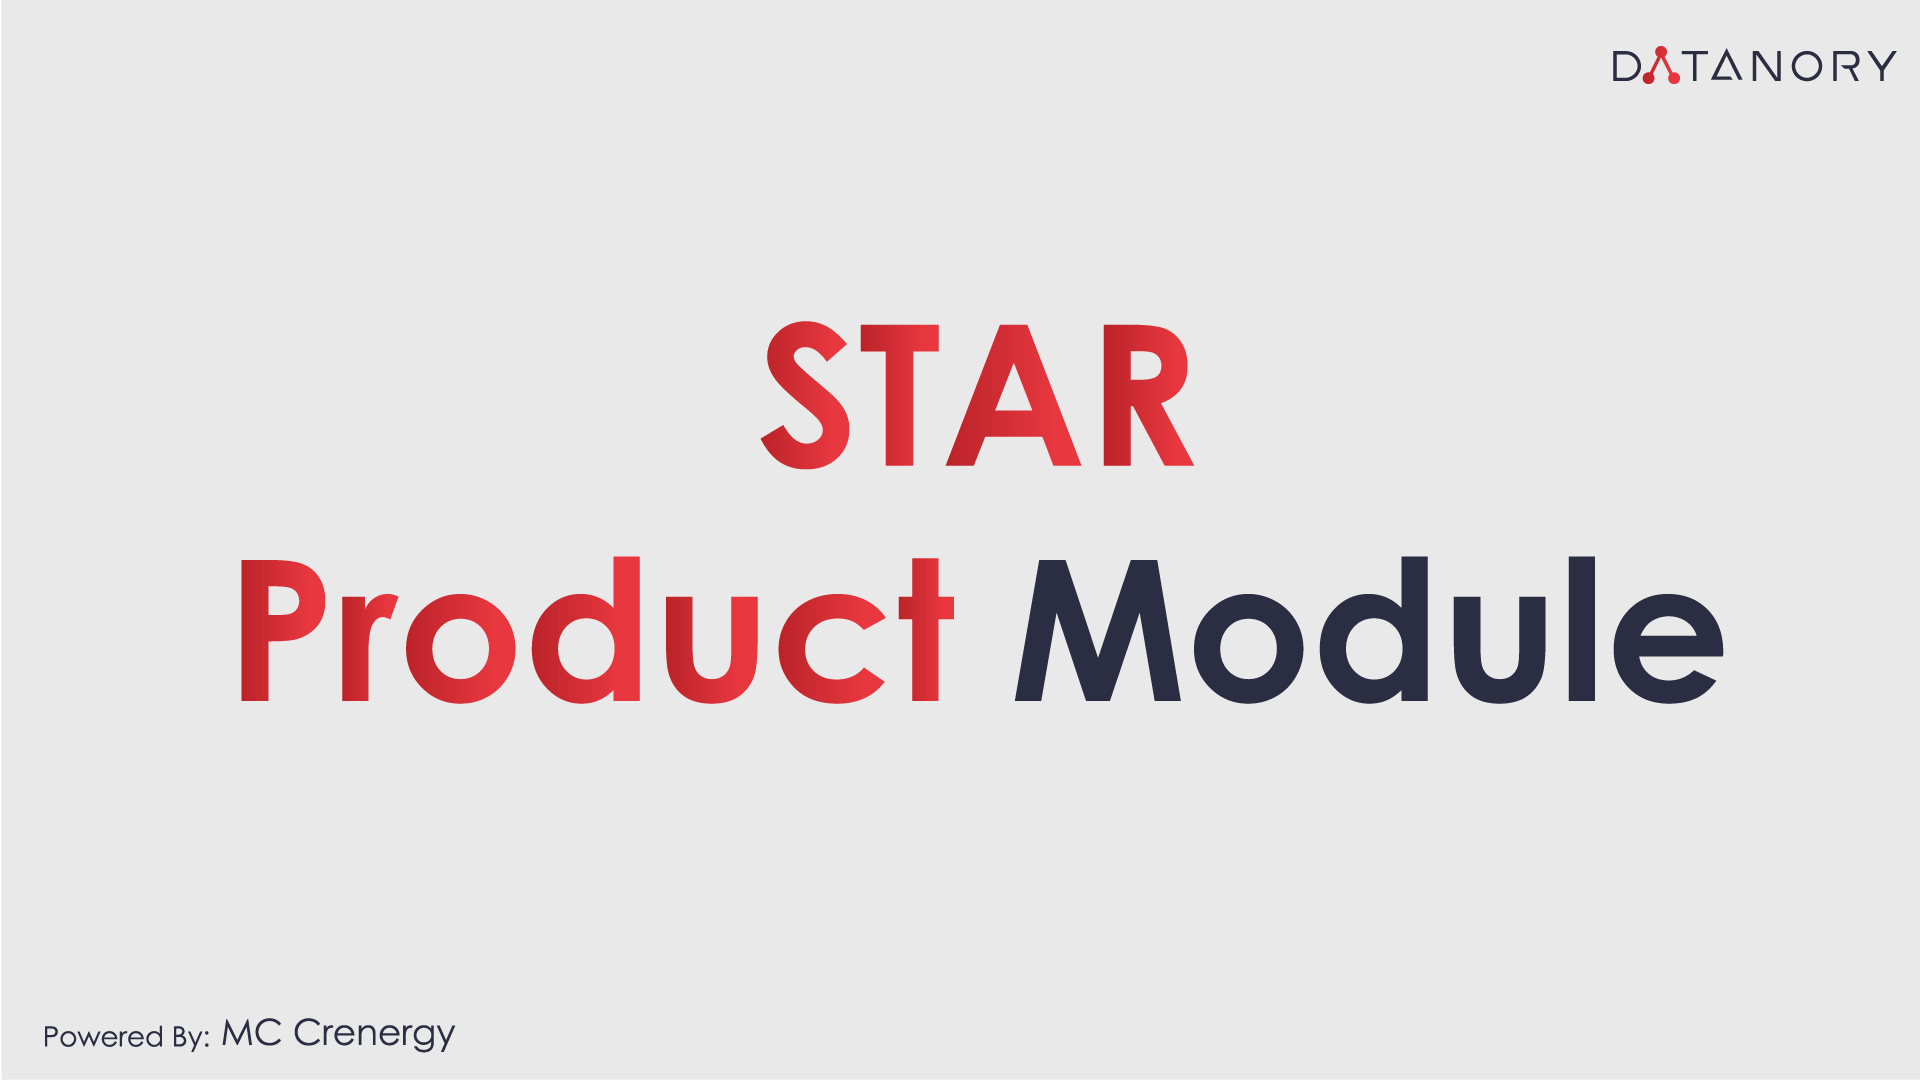 STAR Product Module